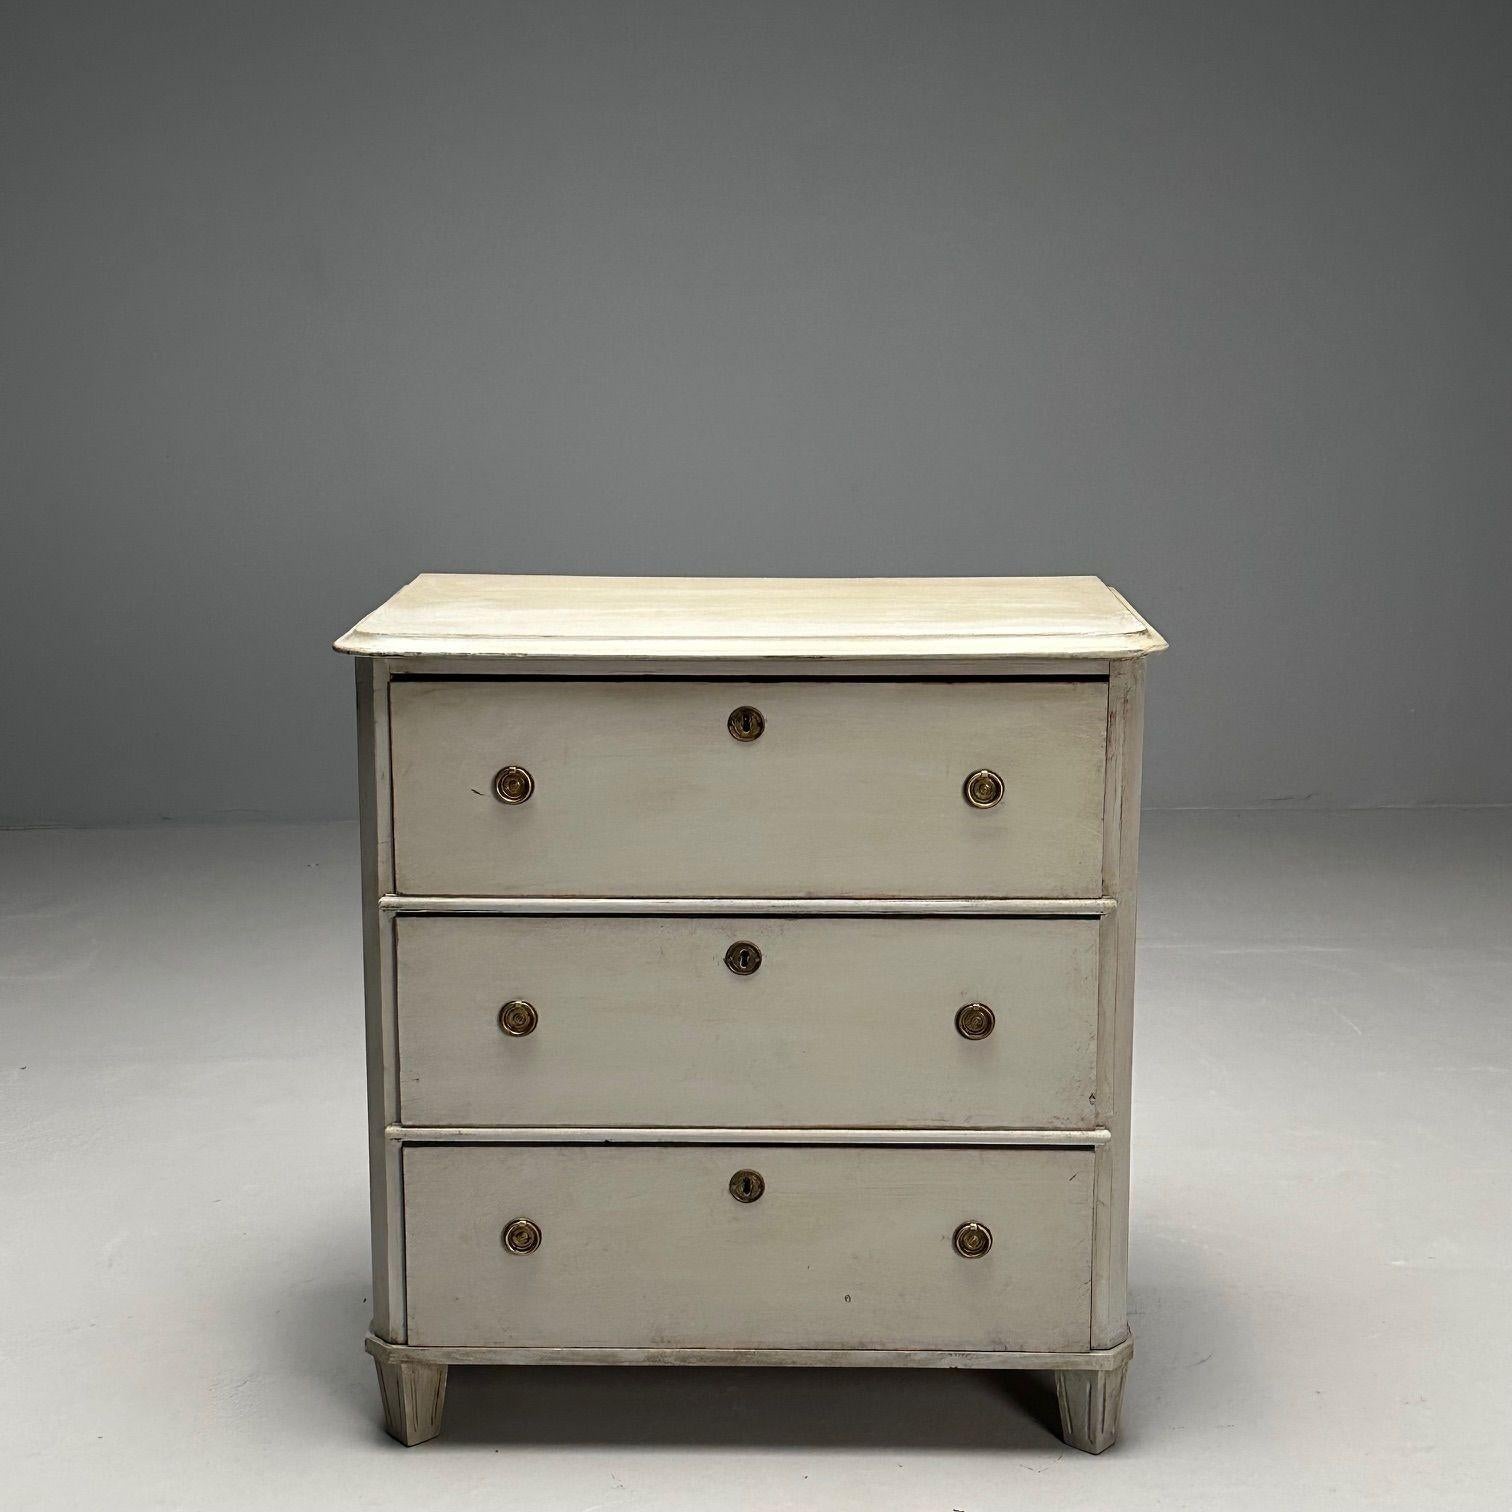 Gustavian, Swedish Commode, Grey Paint Distressed, Brass, Sweden, 1930s

Gustavian chest of drawers designed and produced in Sweden circa 1930s. This example features a gray paint distressed finish with rounded corners and three dovetailed drawers